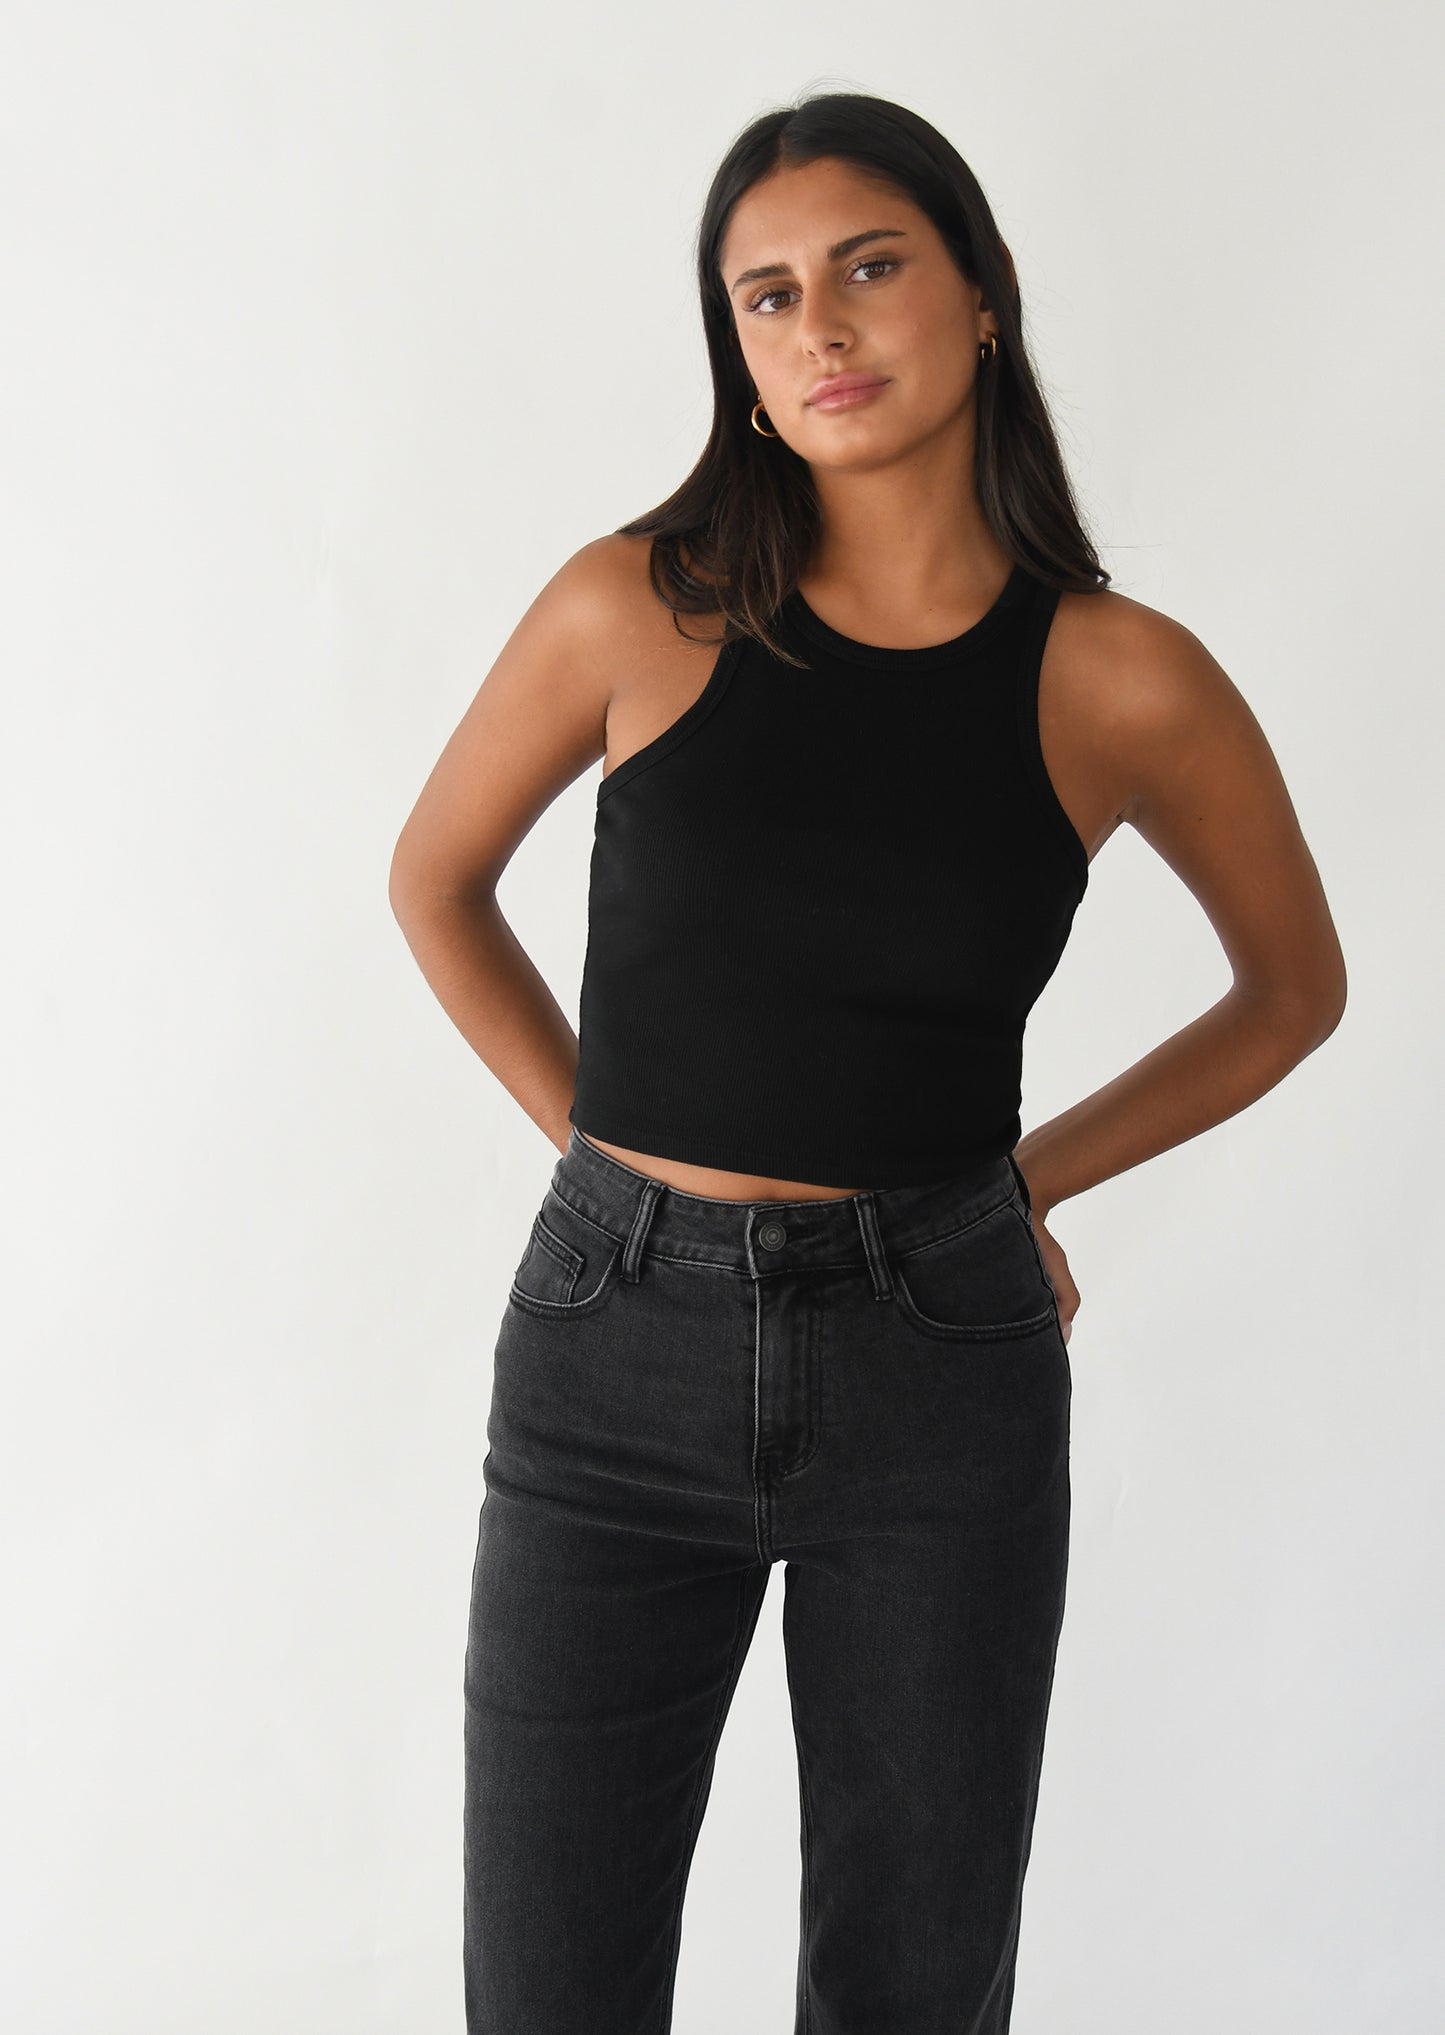 Dad jeans gris oscuro